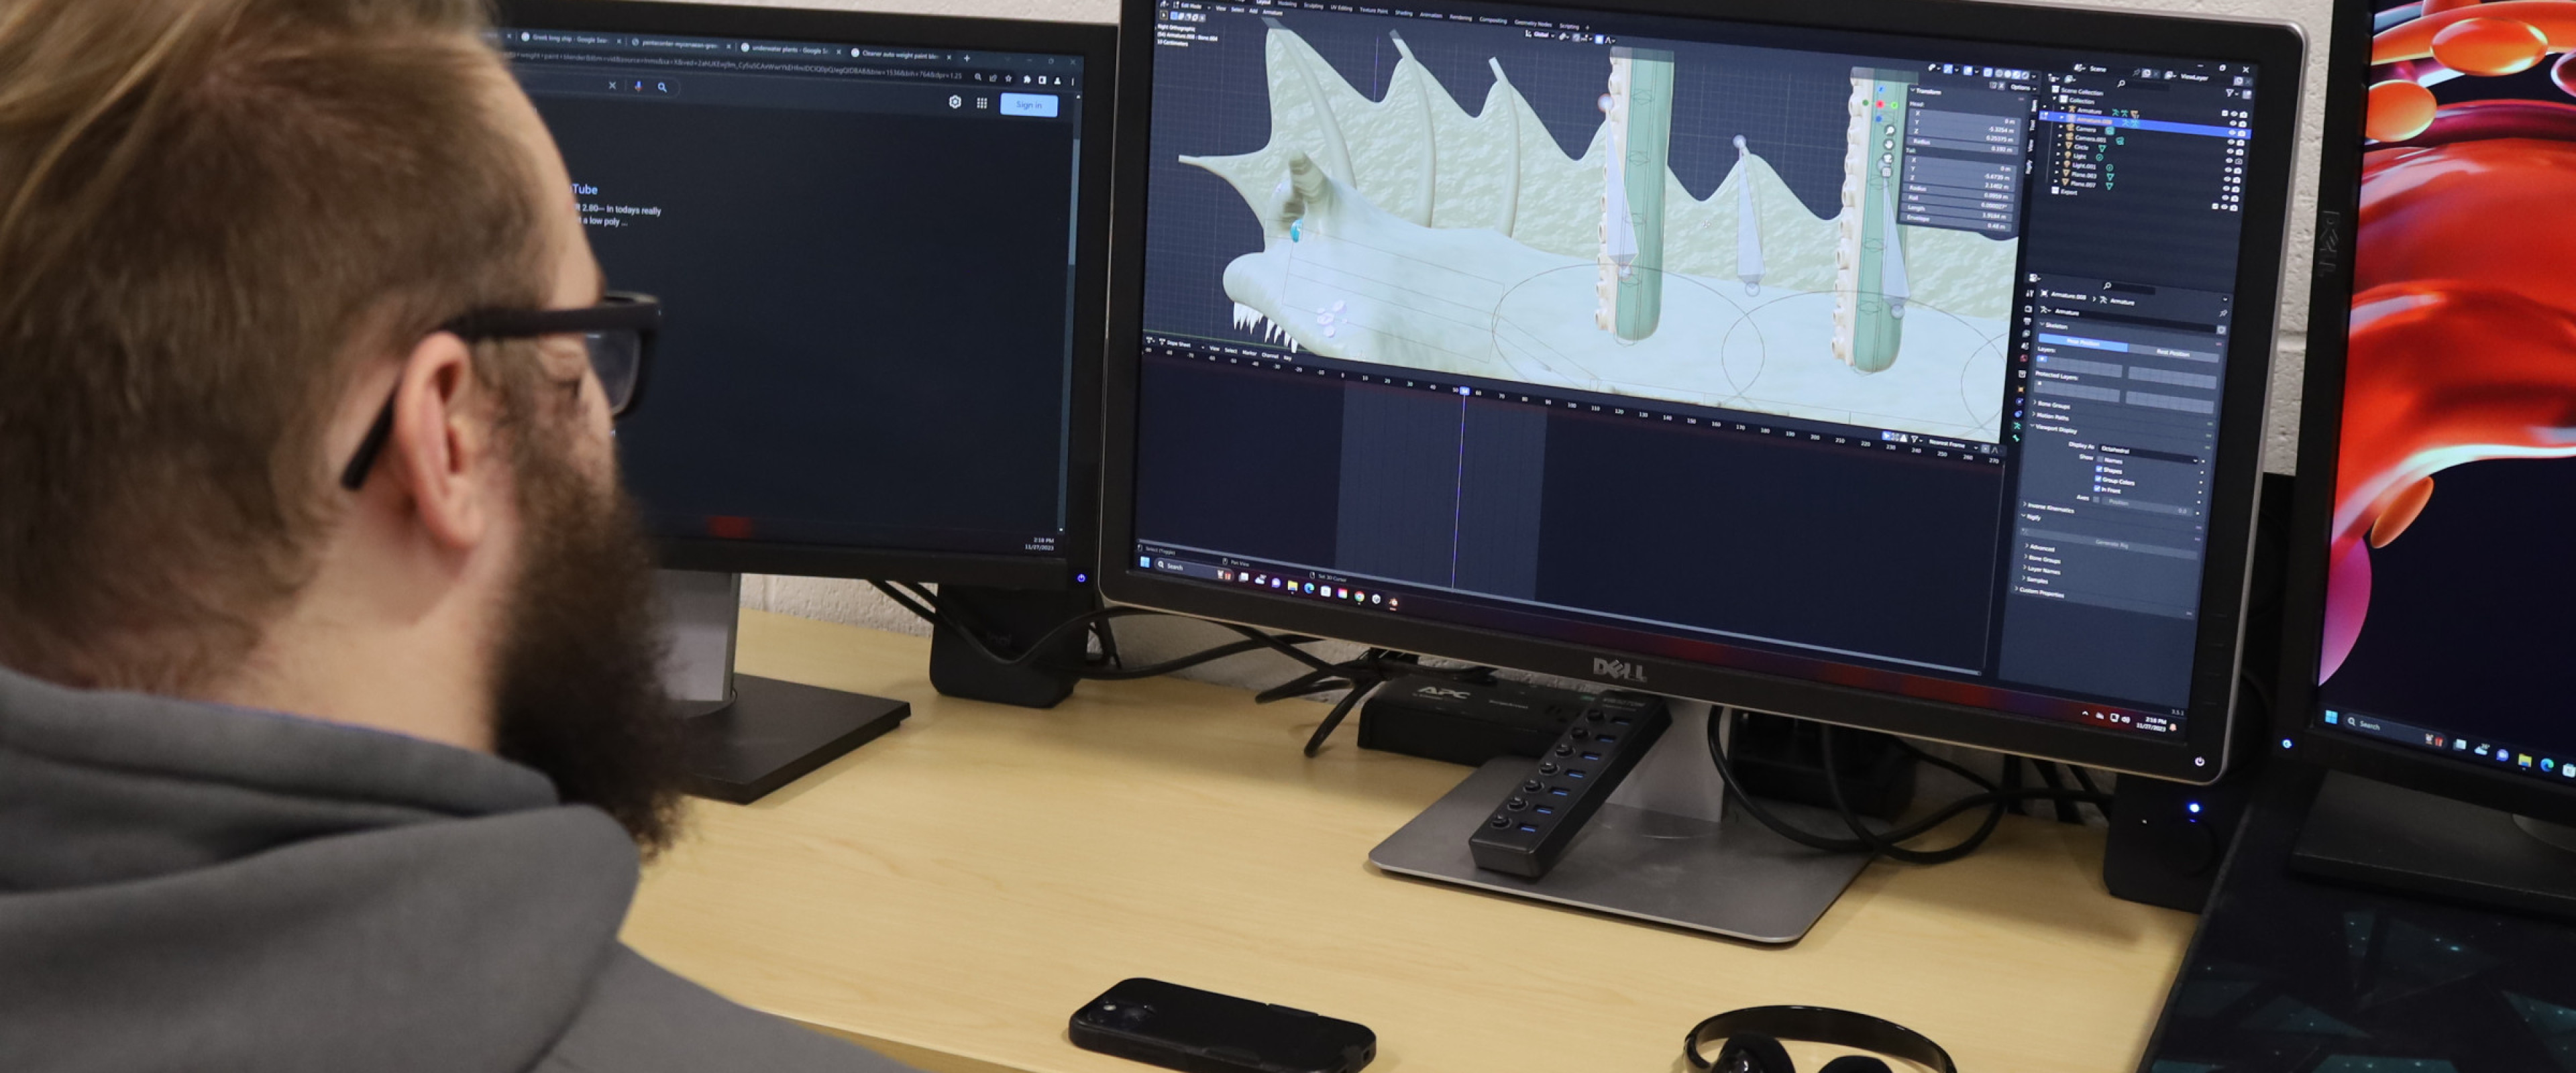 VITAL Student Technology Assistant creating 3D animations with Blender on PC.